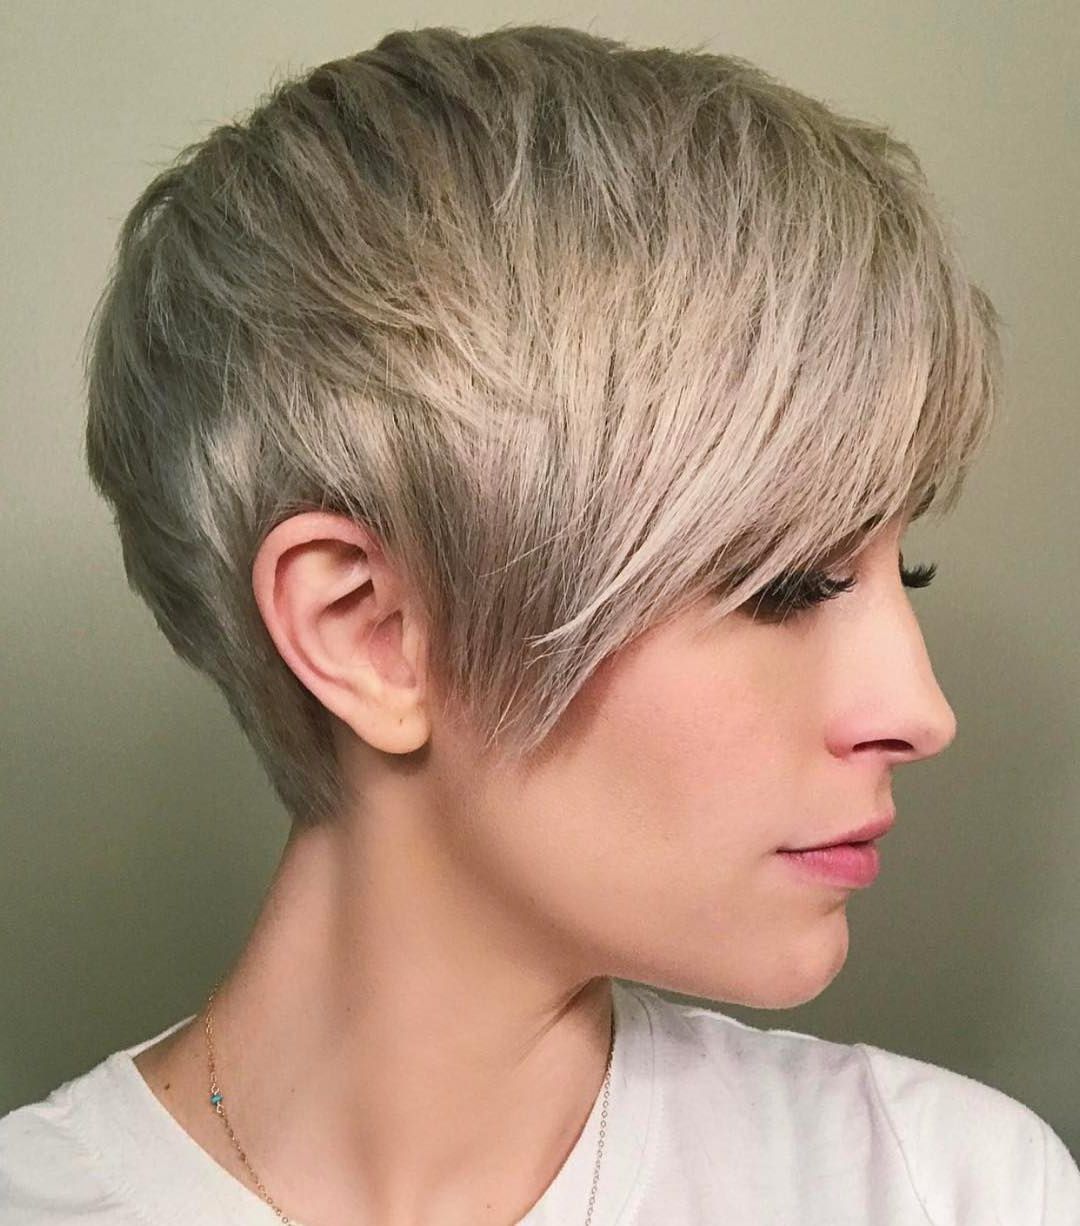 10 Best Short Straight Hairstyle Trends – Women Short Haircut Ideas 2018 Regarding Short Haircuts For Women In Their 50s (View 13 of 25)